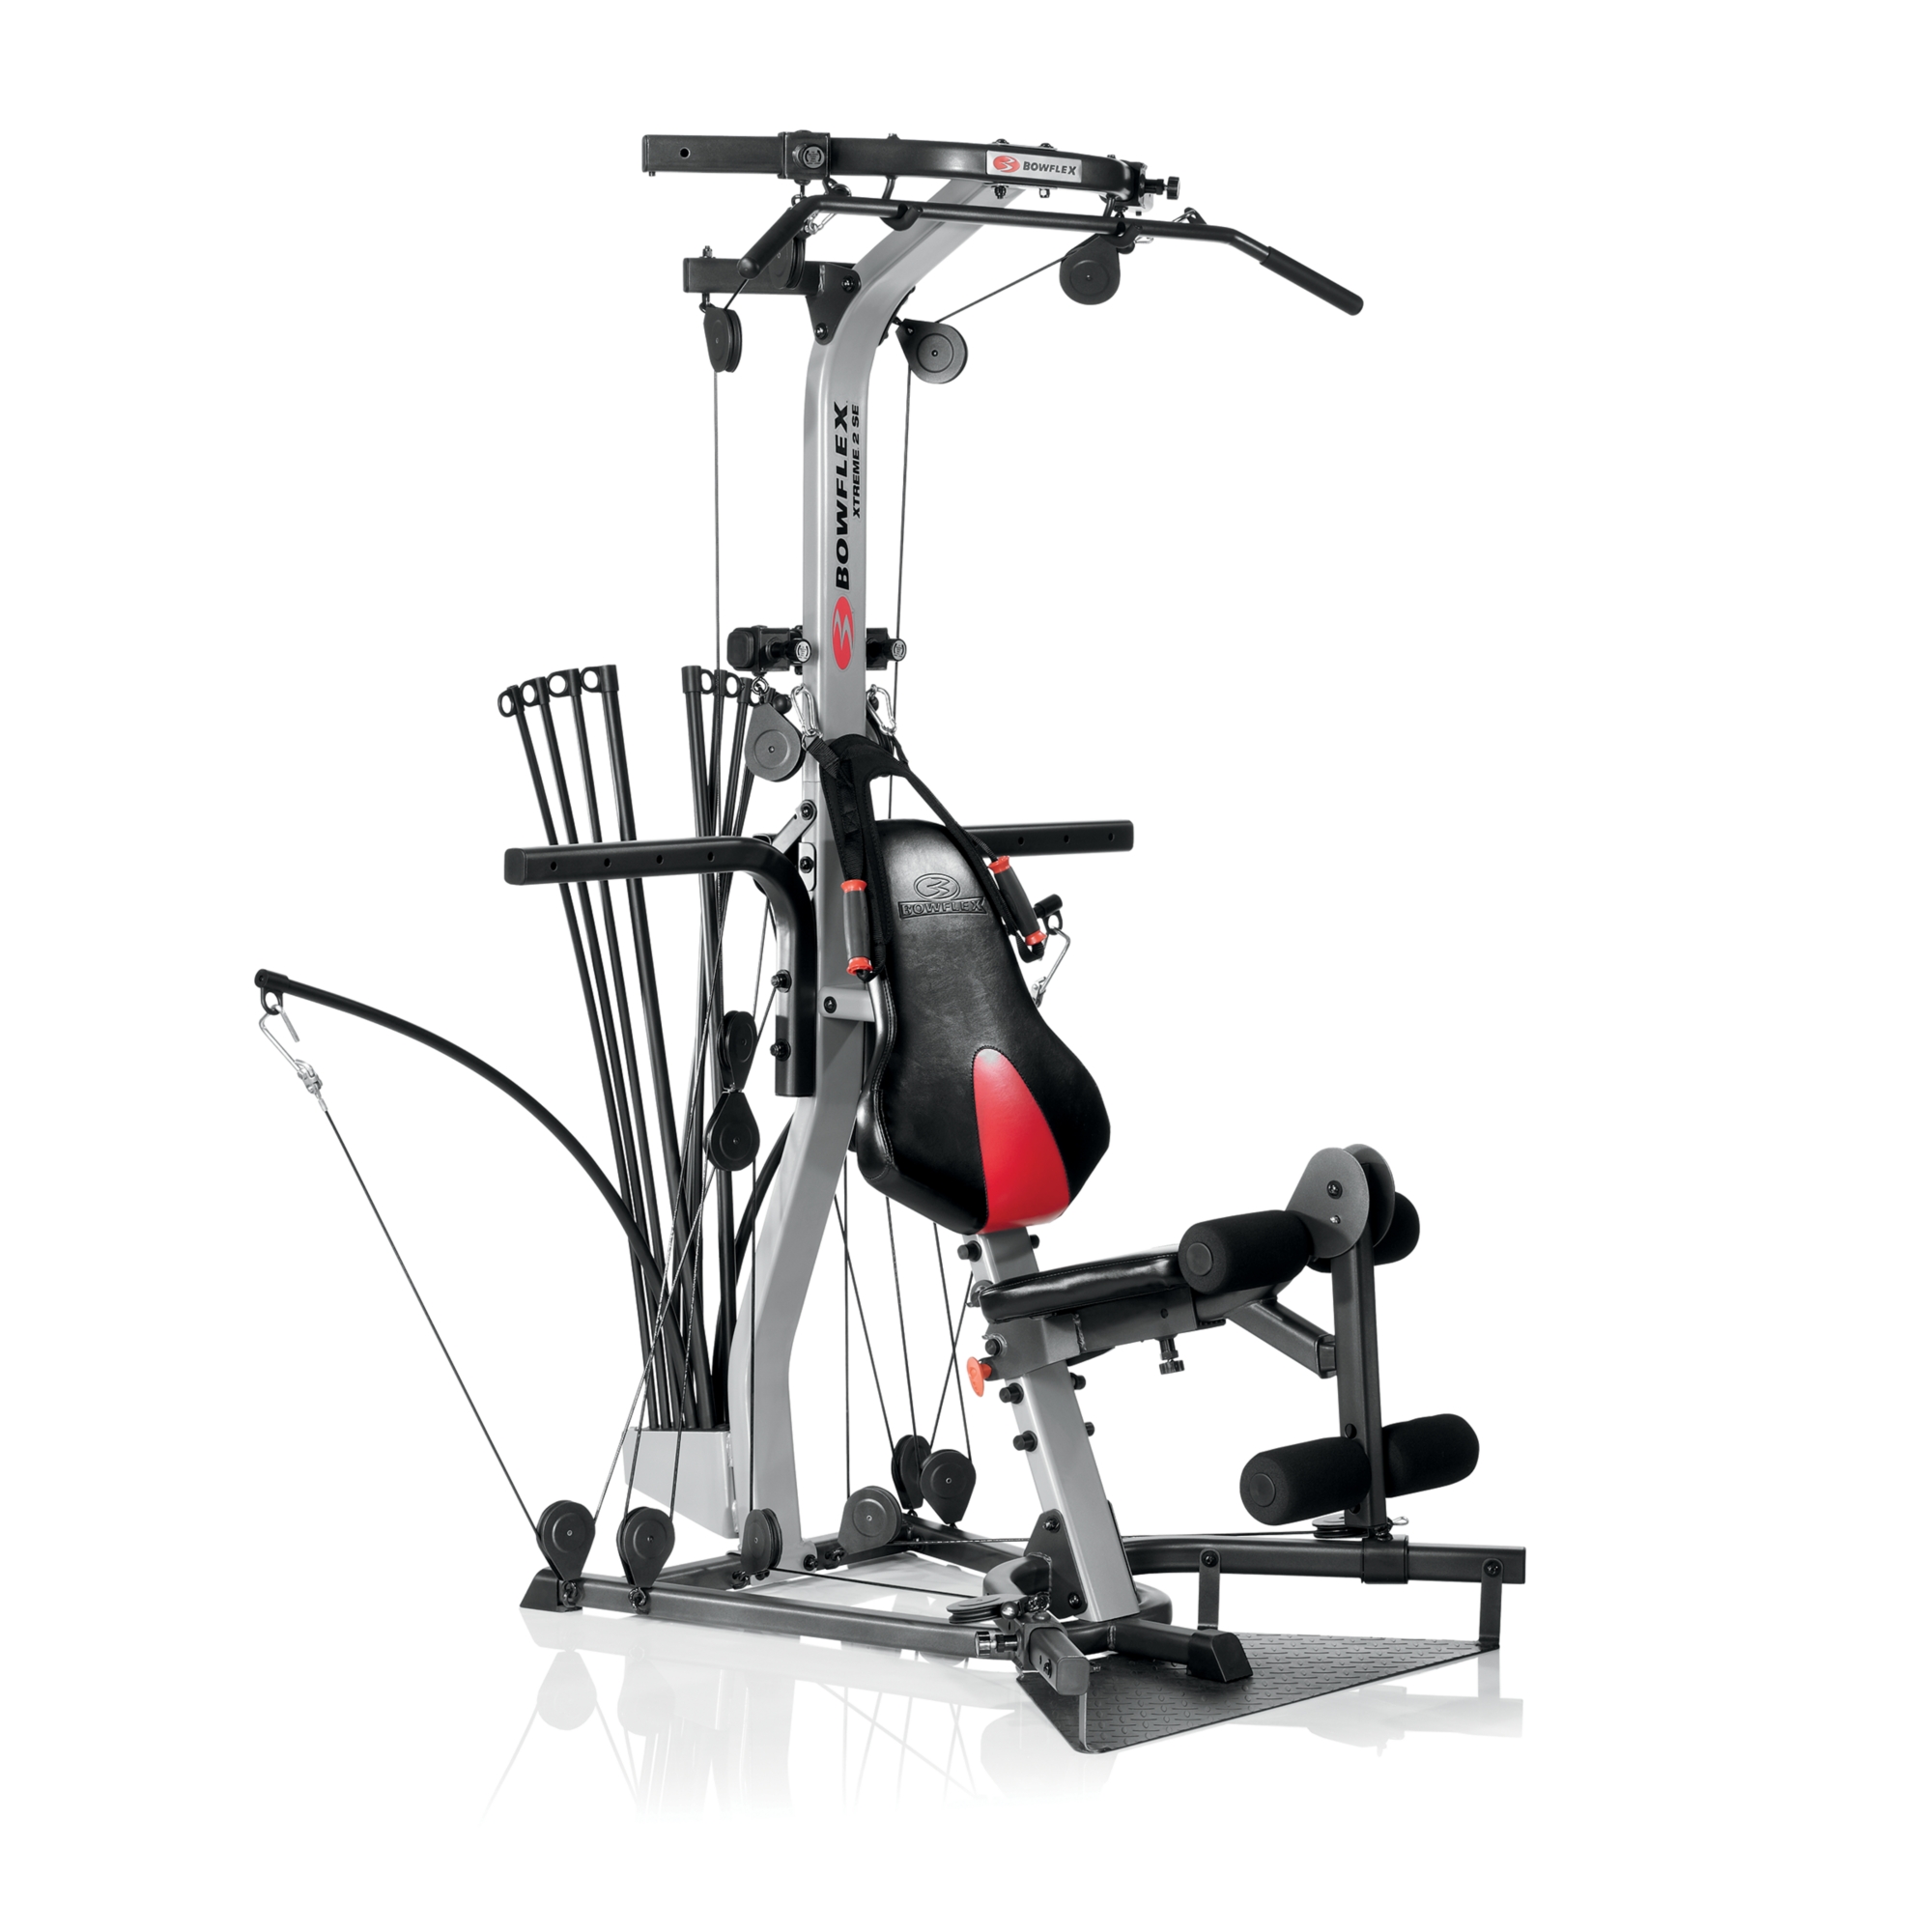 Simple Bowflex Xtreme 2 Leg Workouts for push your ABS